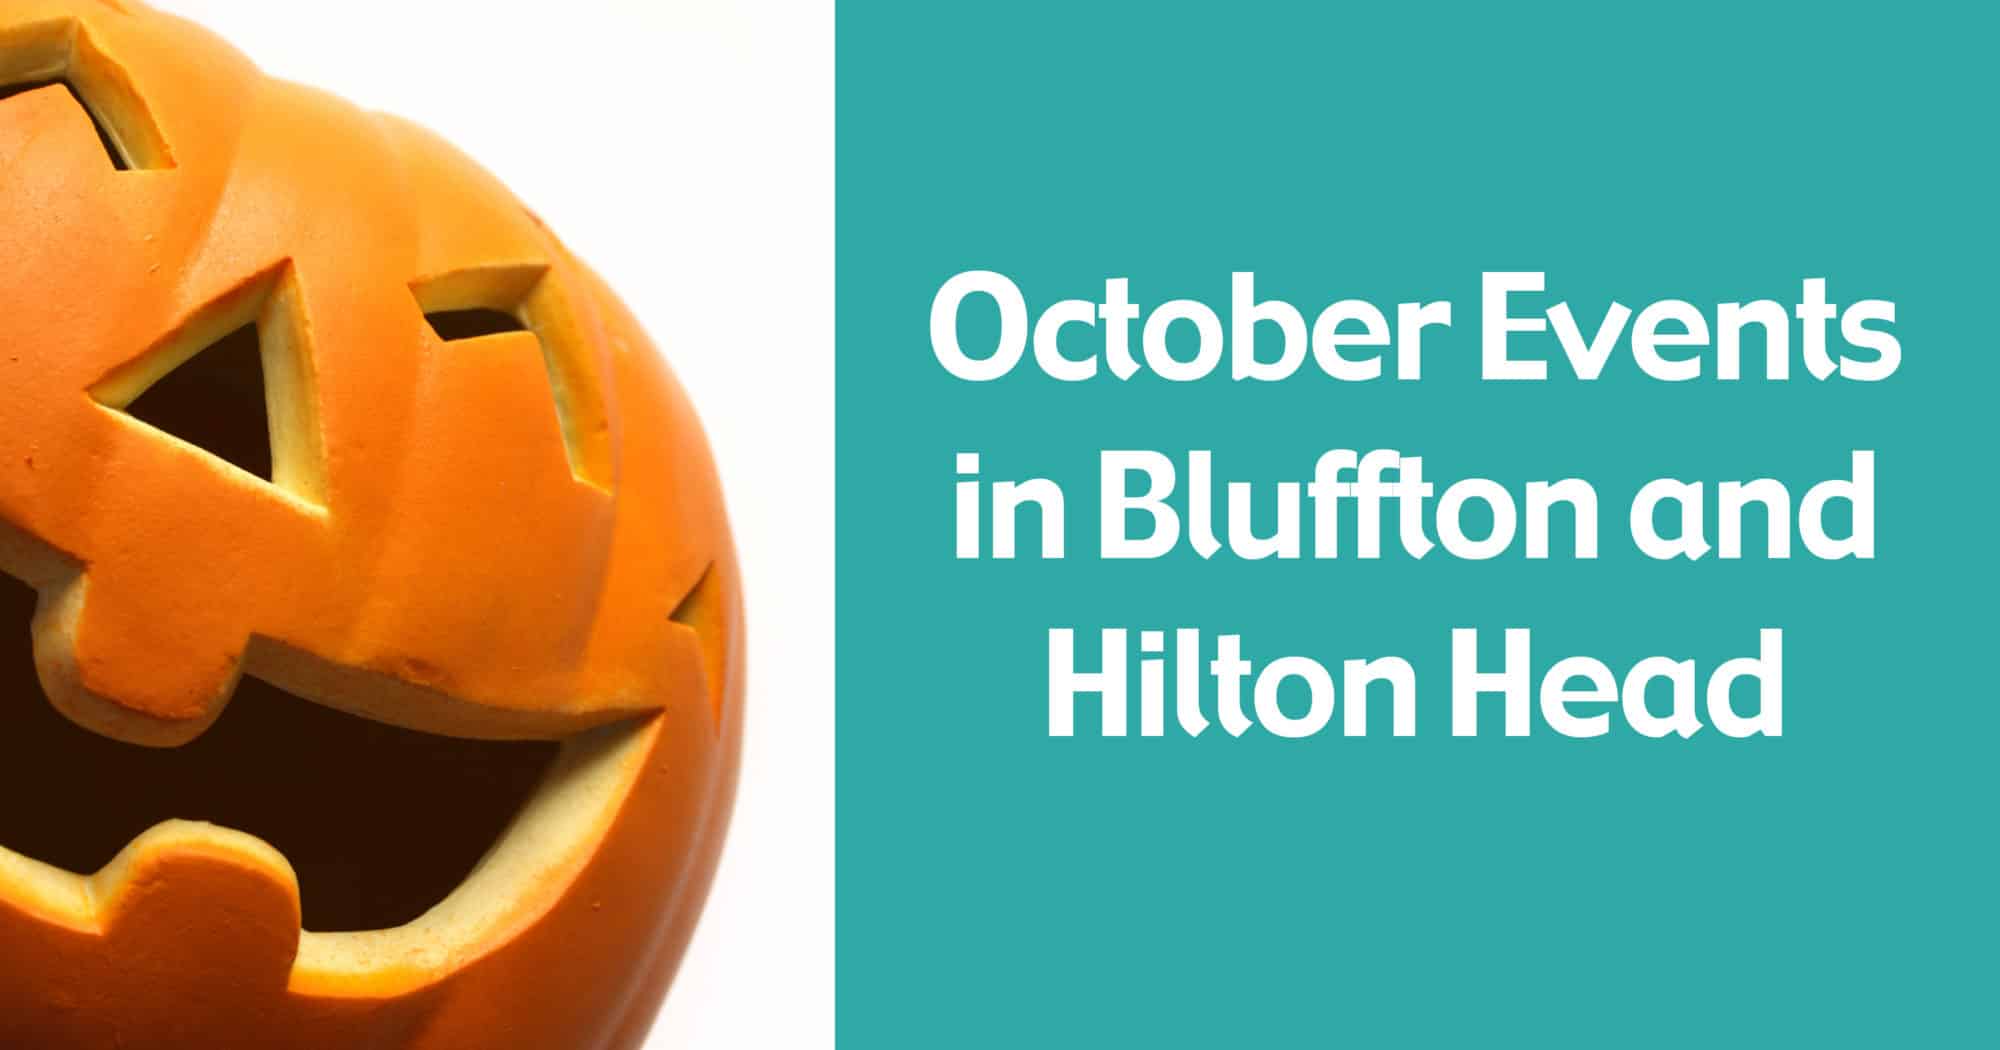 Happy Fall Y'all October Events in Bluffton and Hilton Head